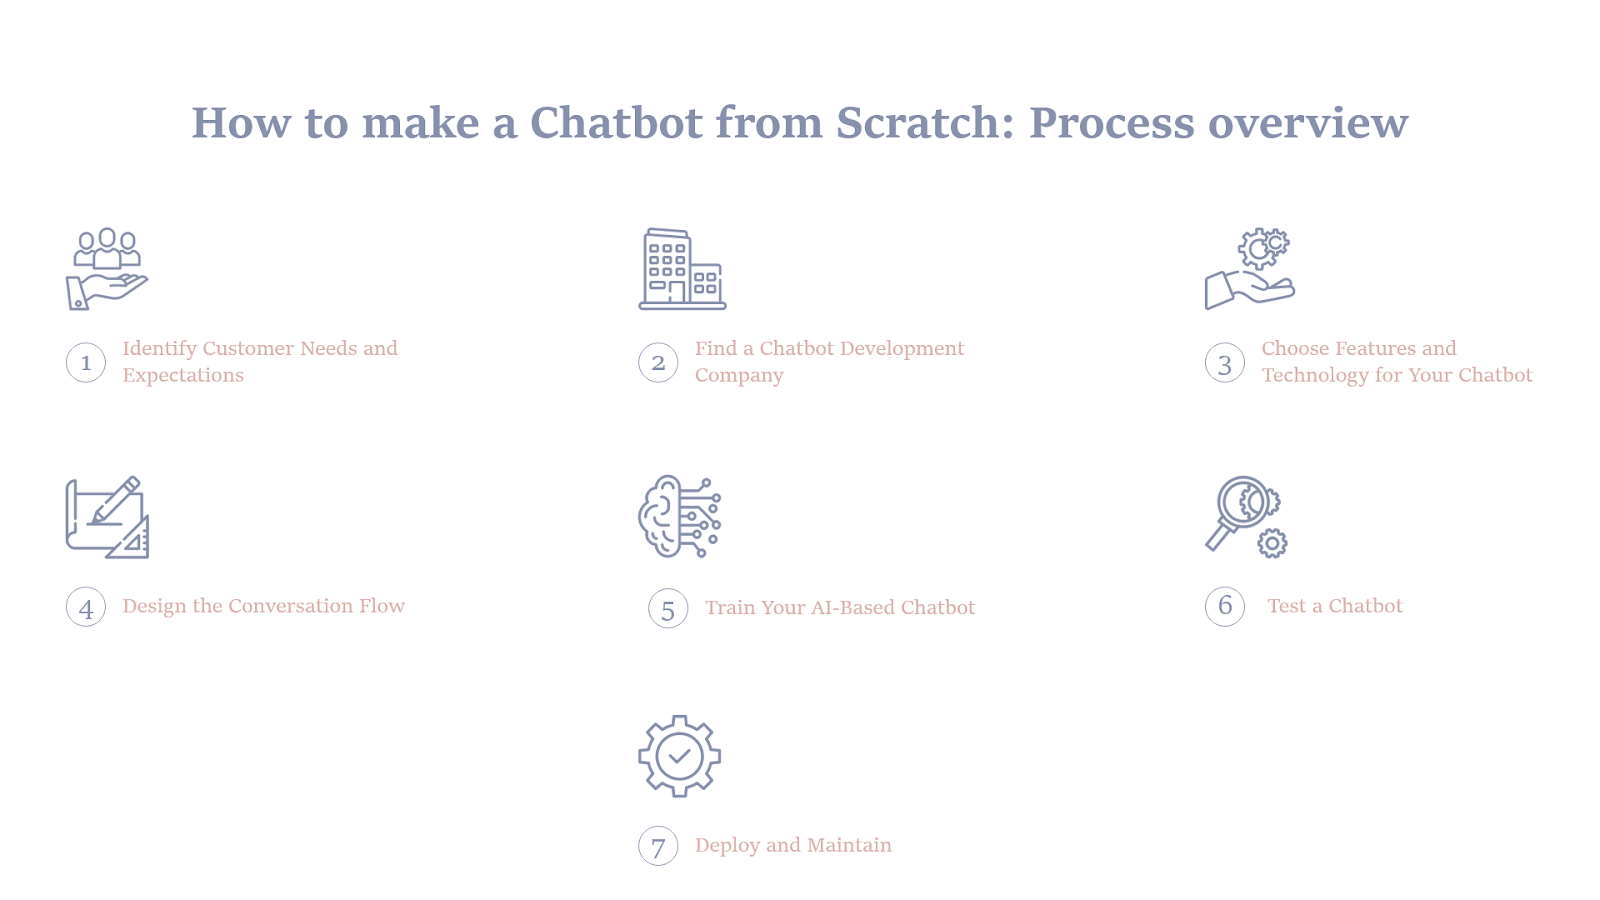 How to Make a Chatbot: Technologies & Business Benefits 5